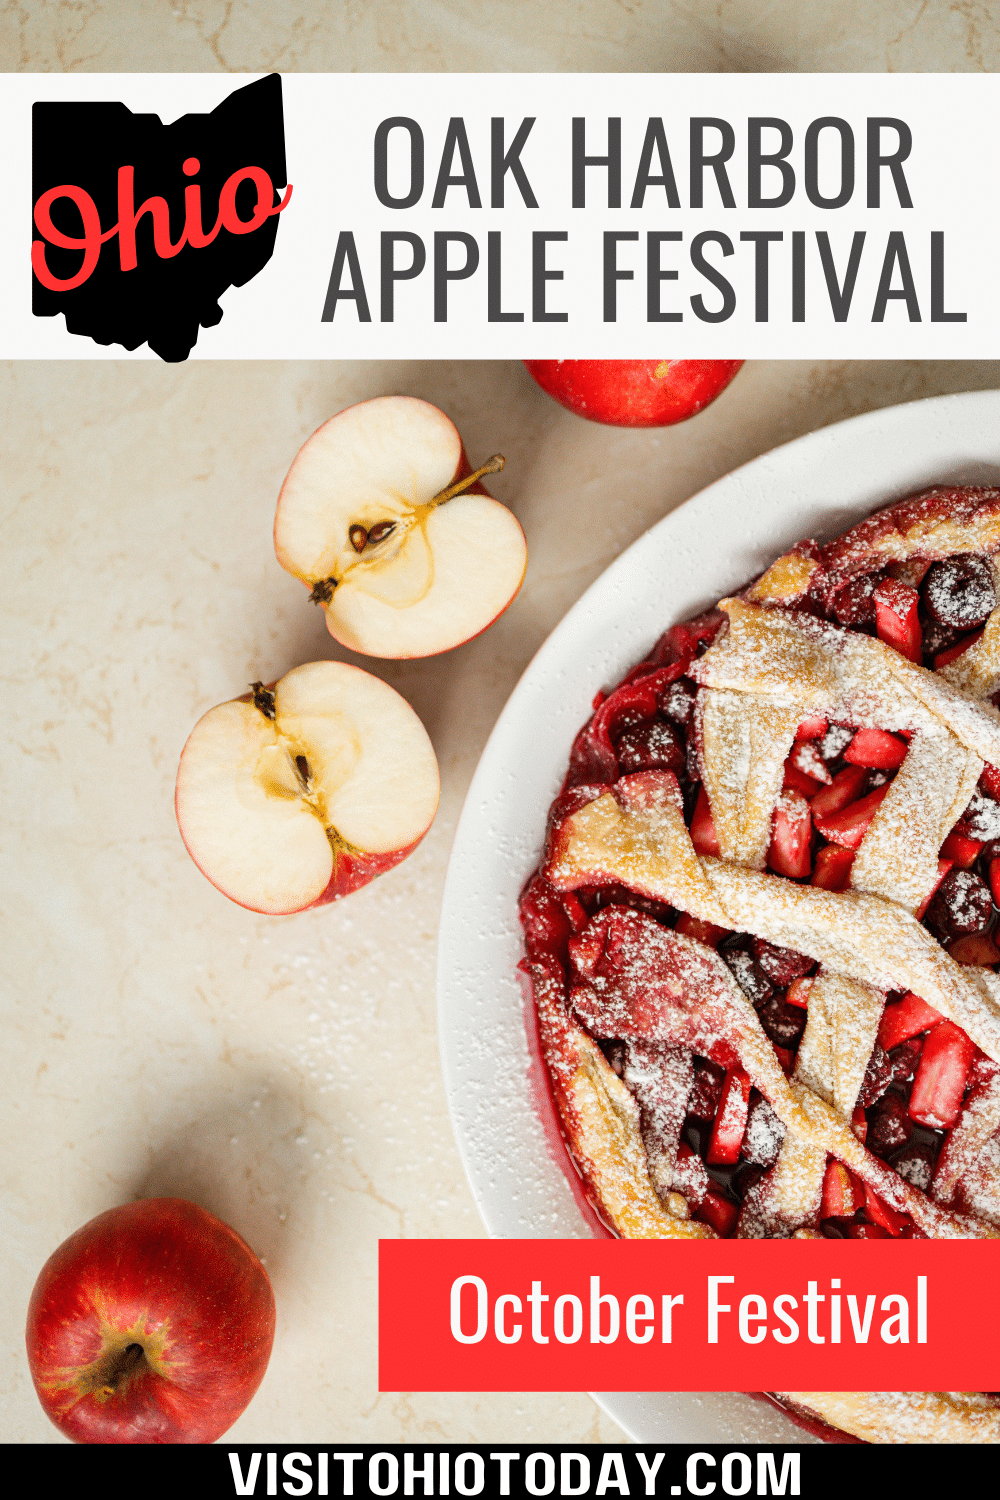 The Oak Harbor Apple Festival is held on the weekend of 14th and 15th October 2023. All activities at this festival are located within a two-block walking area.